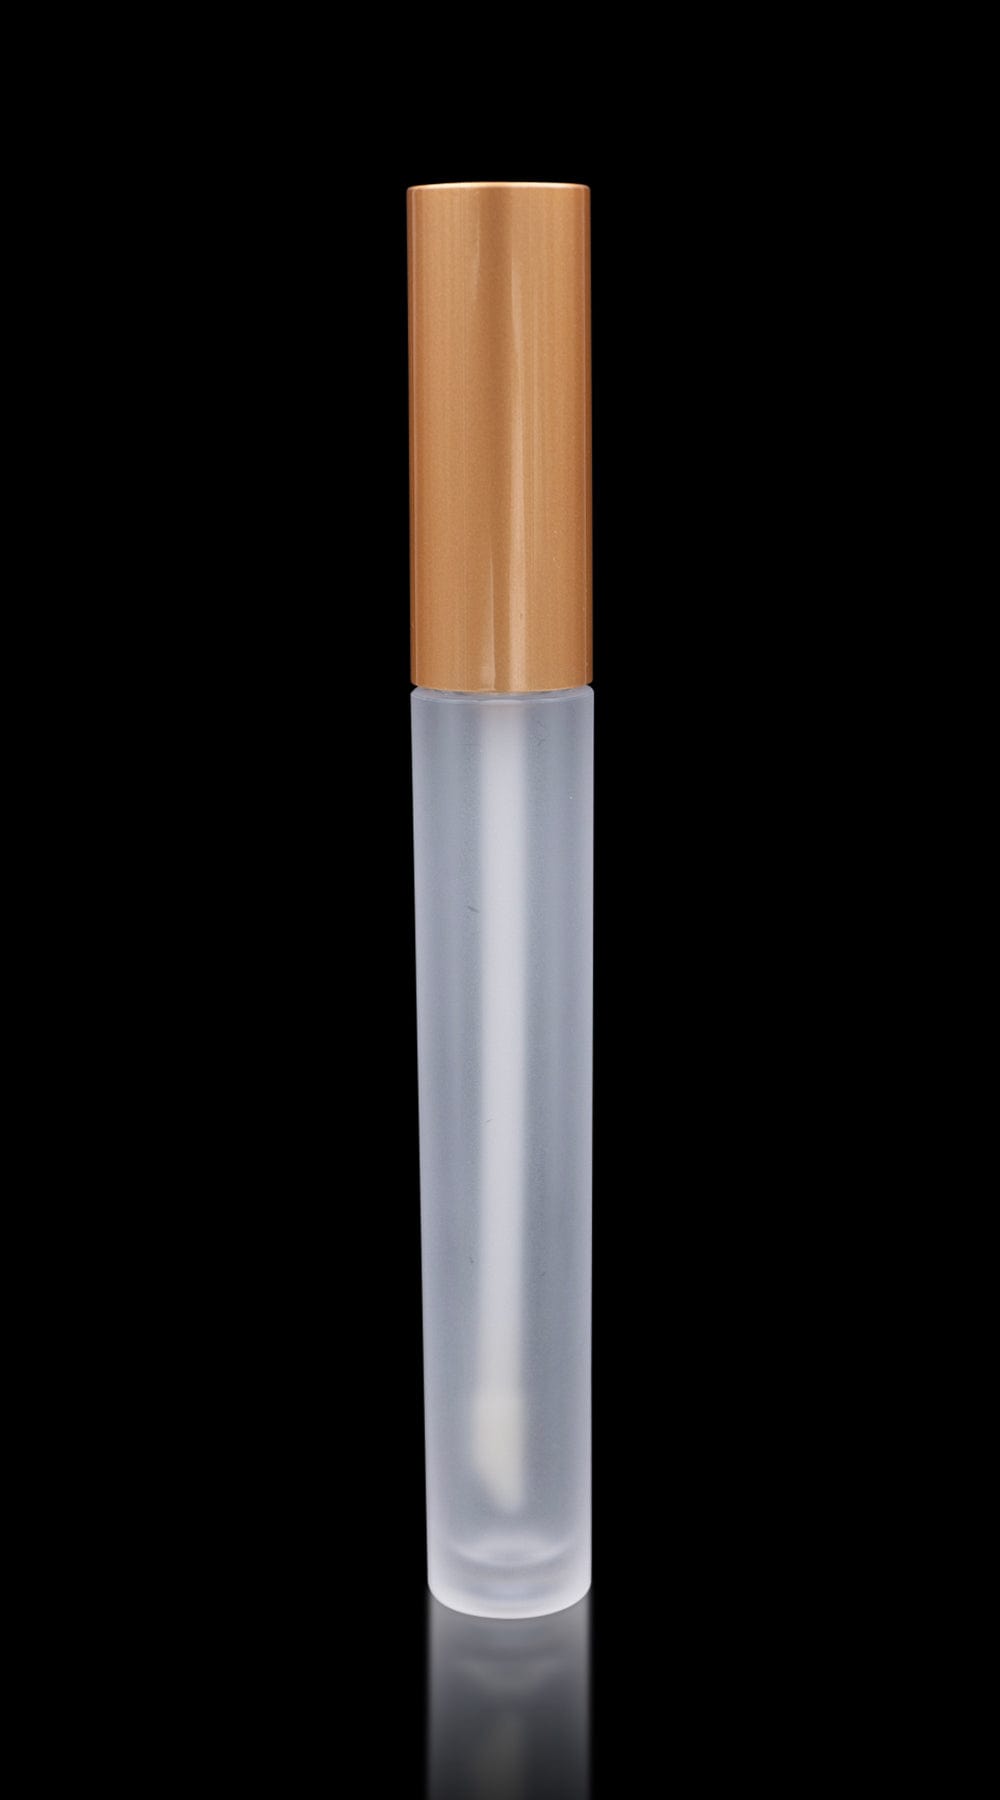 Vibe Lip Gloss Container Matte Gold Cap with Frosted Bottle - Cosmetic Packaging Now